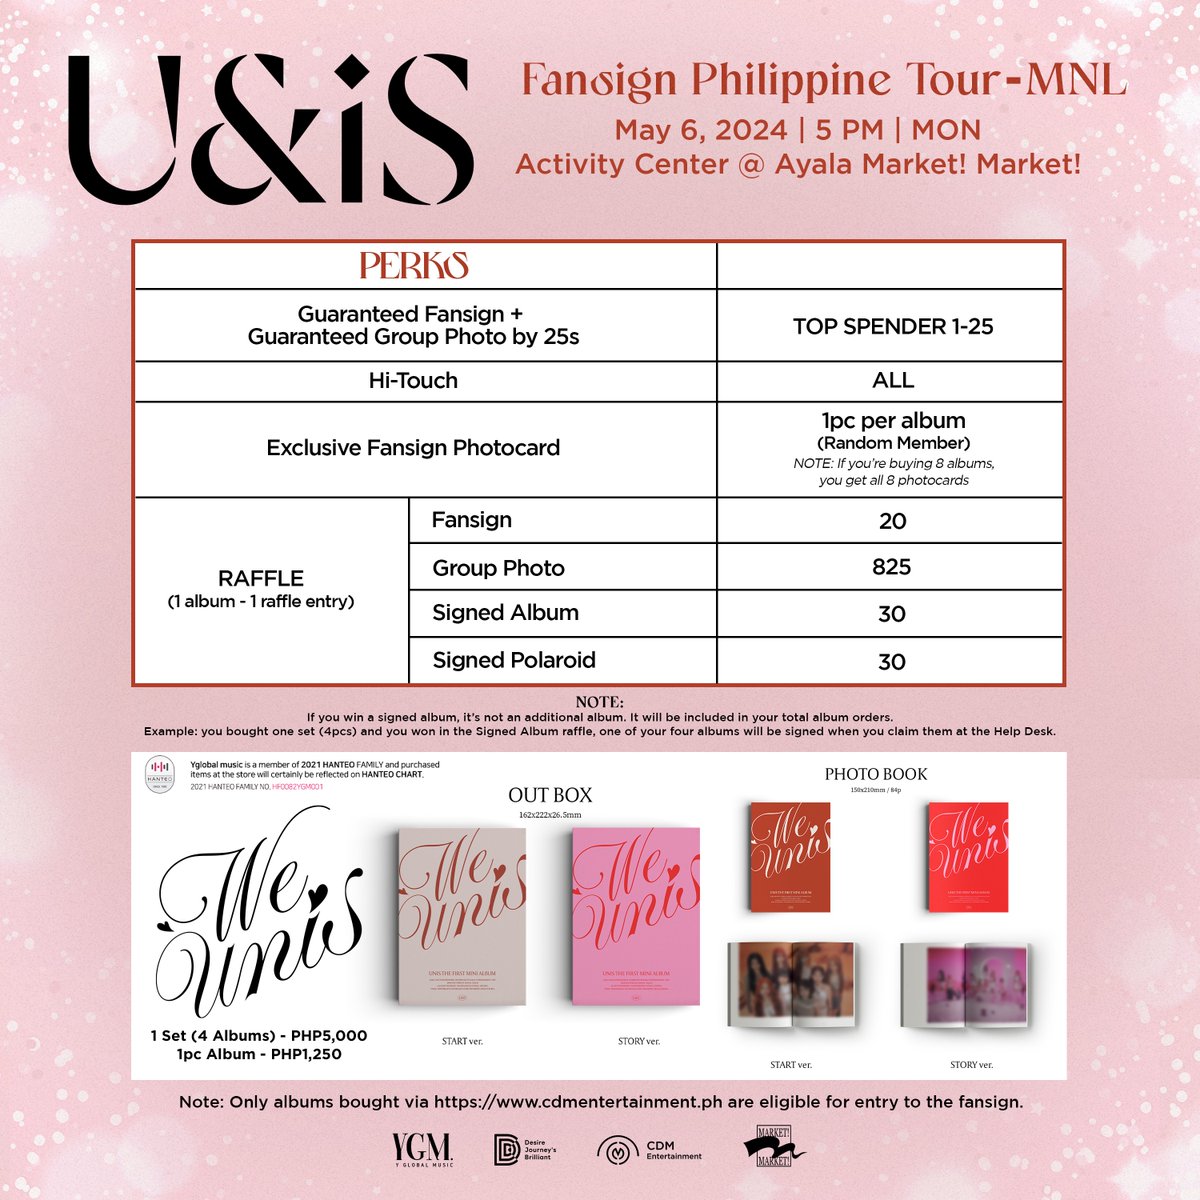 MANILA! Mechanics for Day 2 of UNIS’ Fansign Event is here! Same as other cities — Buy one set of UNIS’ “WE UNIS” album via cdmentertainment.ph. One set of album costs PHP5,000 and includes: 🧡 One ticket for the fansign event 🧡 1 exclusive fansign photocard per album 🧡